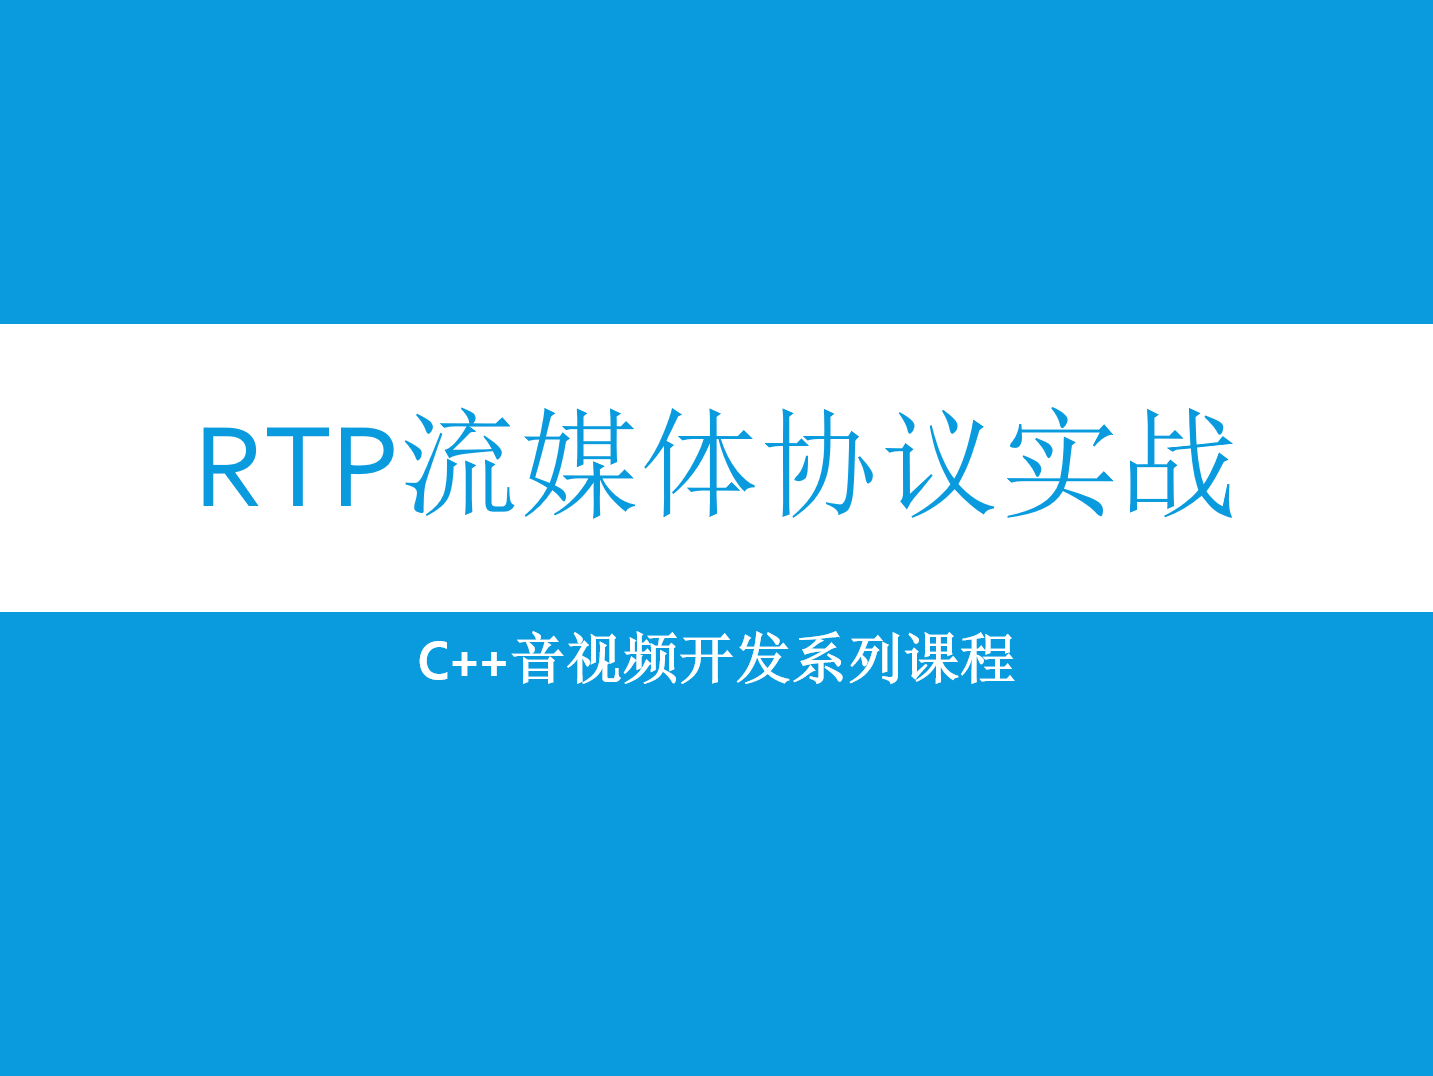  RTP streaming media protocol practical video course (C++audio and video development series)